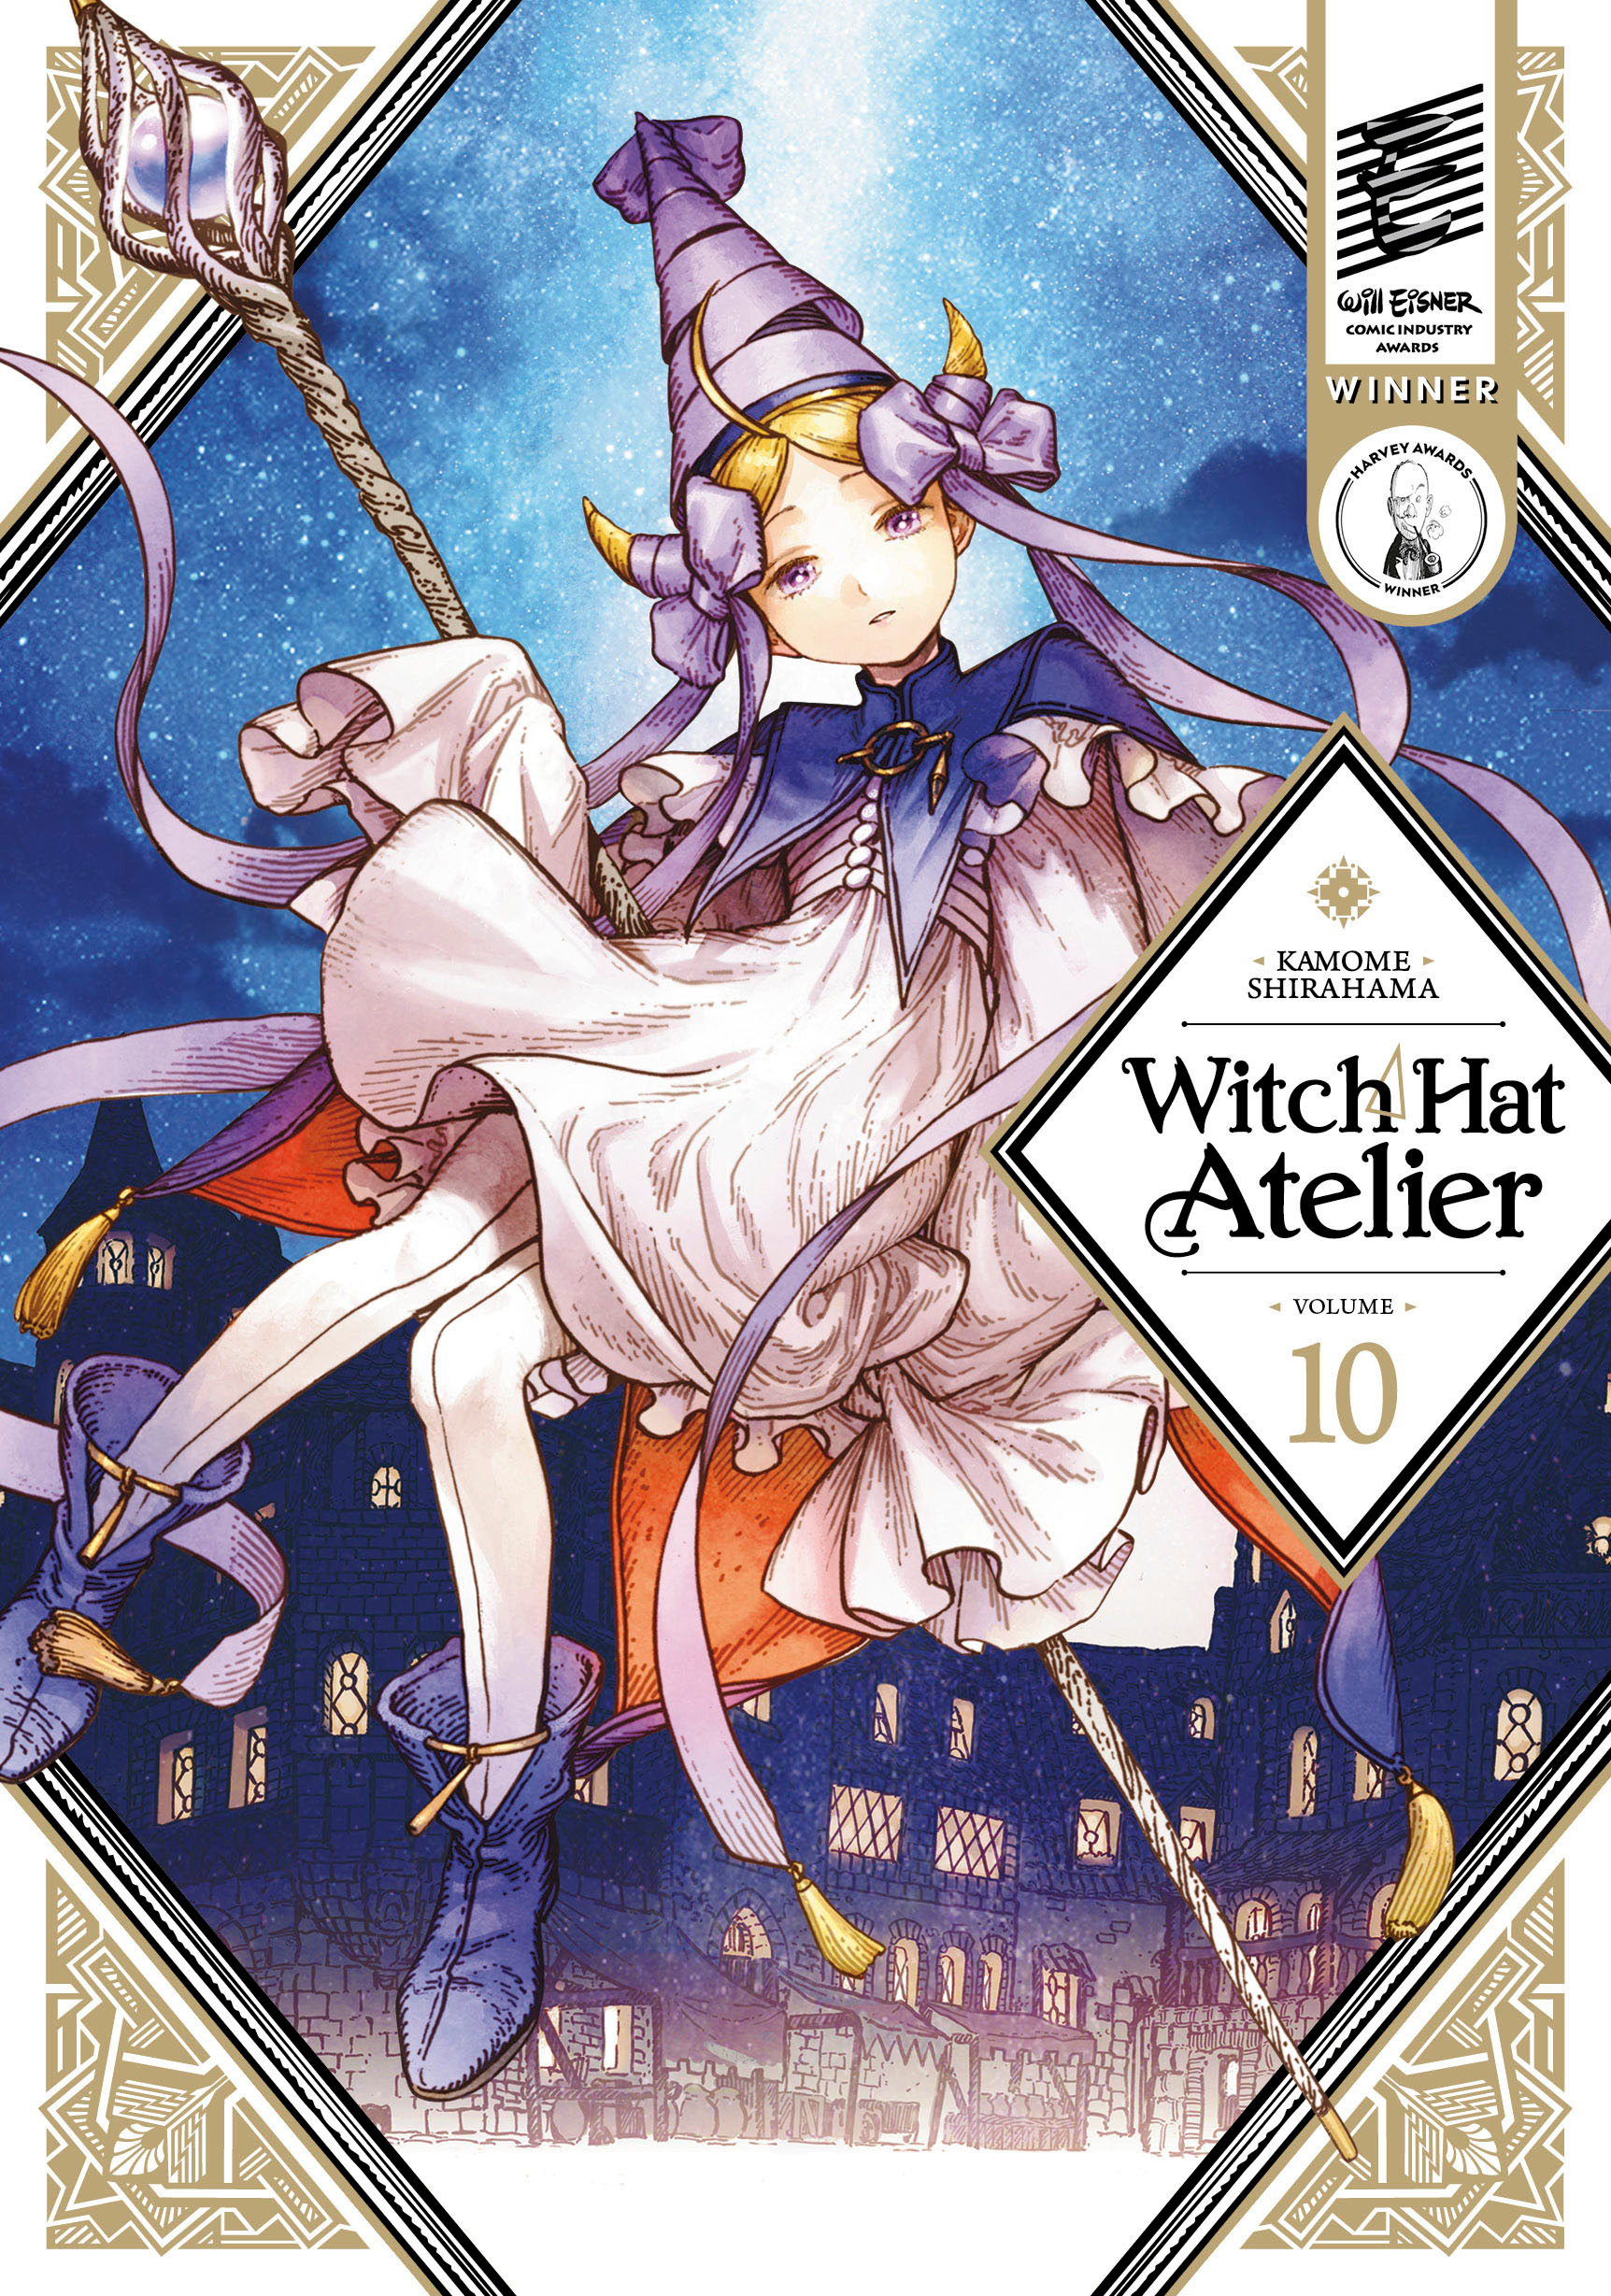 Witch Hat Atelier Vol.10 | Shirahama, Kamome